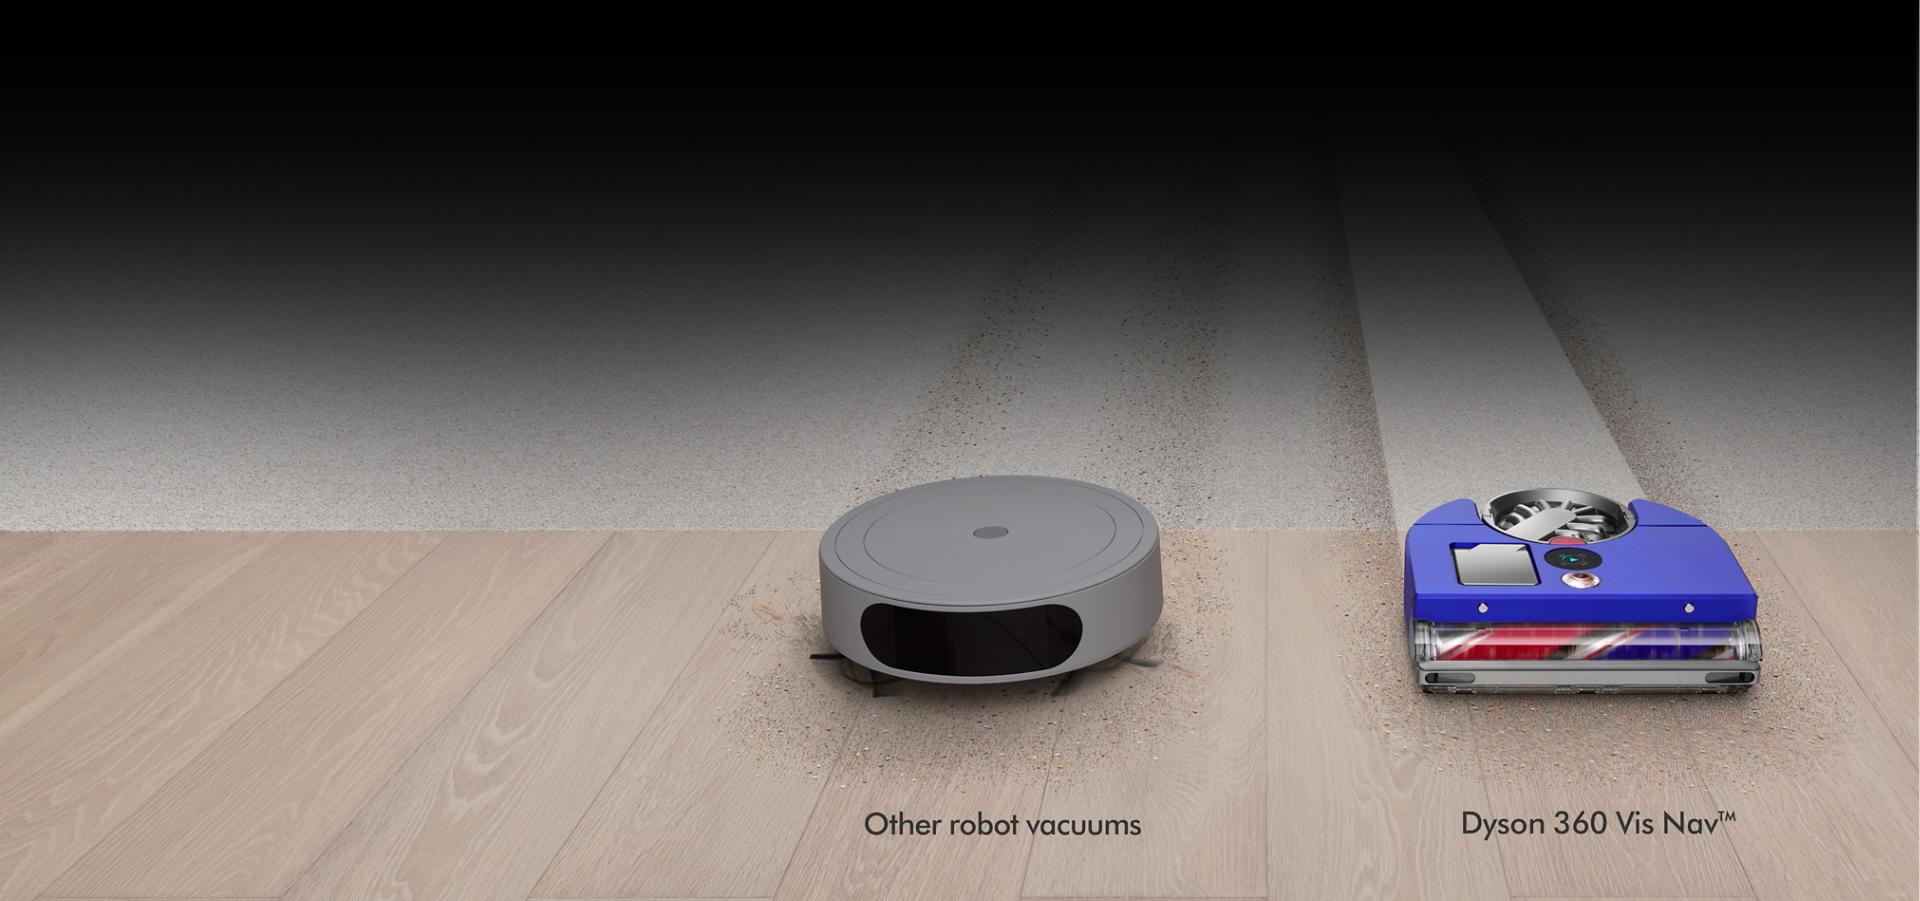 Other robot vacuum vs the Dyson 360 Vis Nav robot cleaning carpet and hard floor